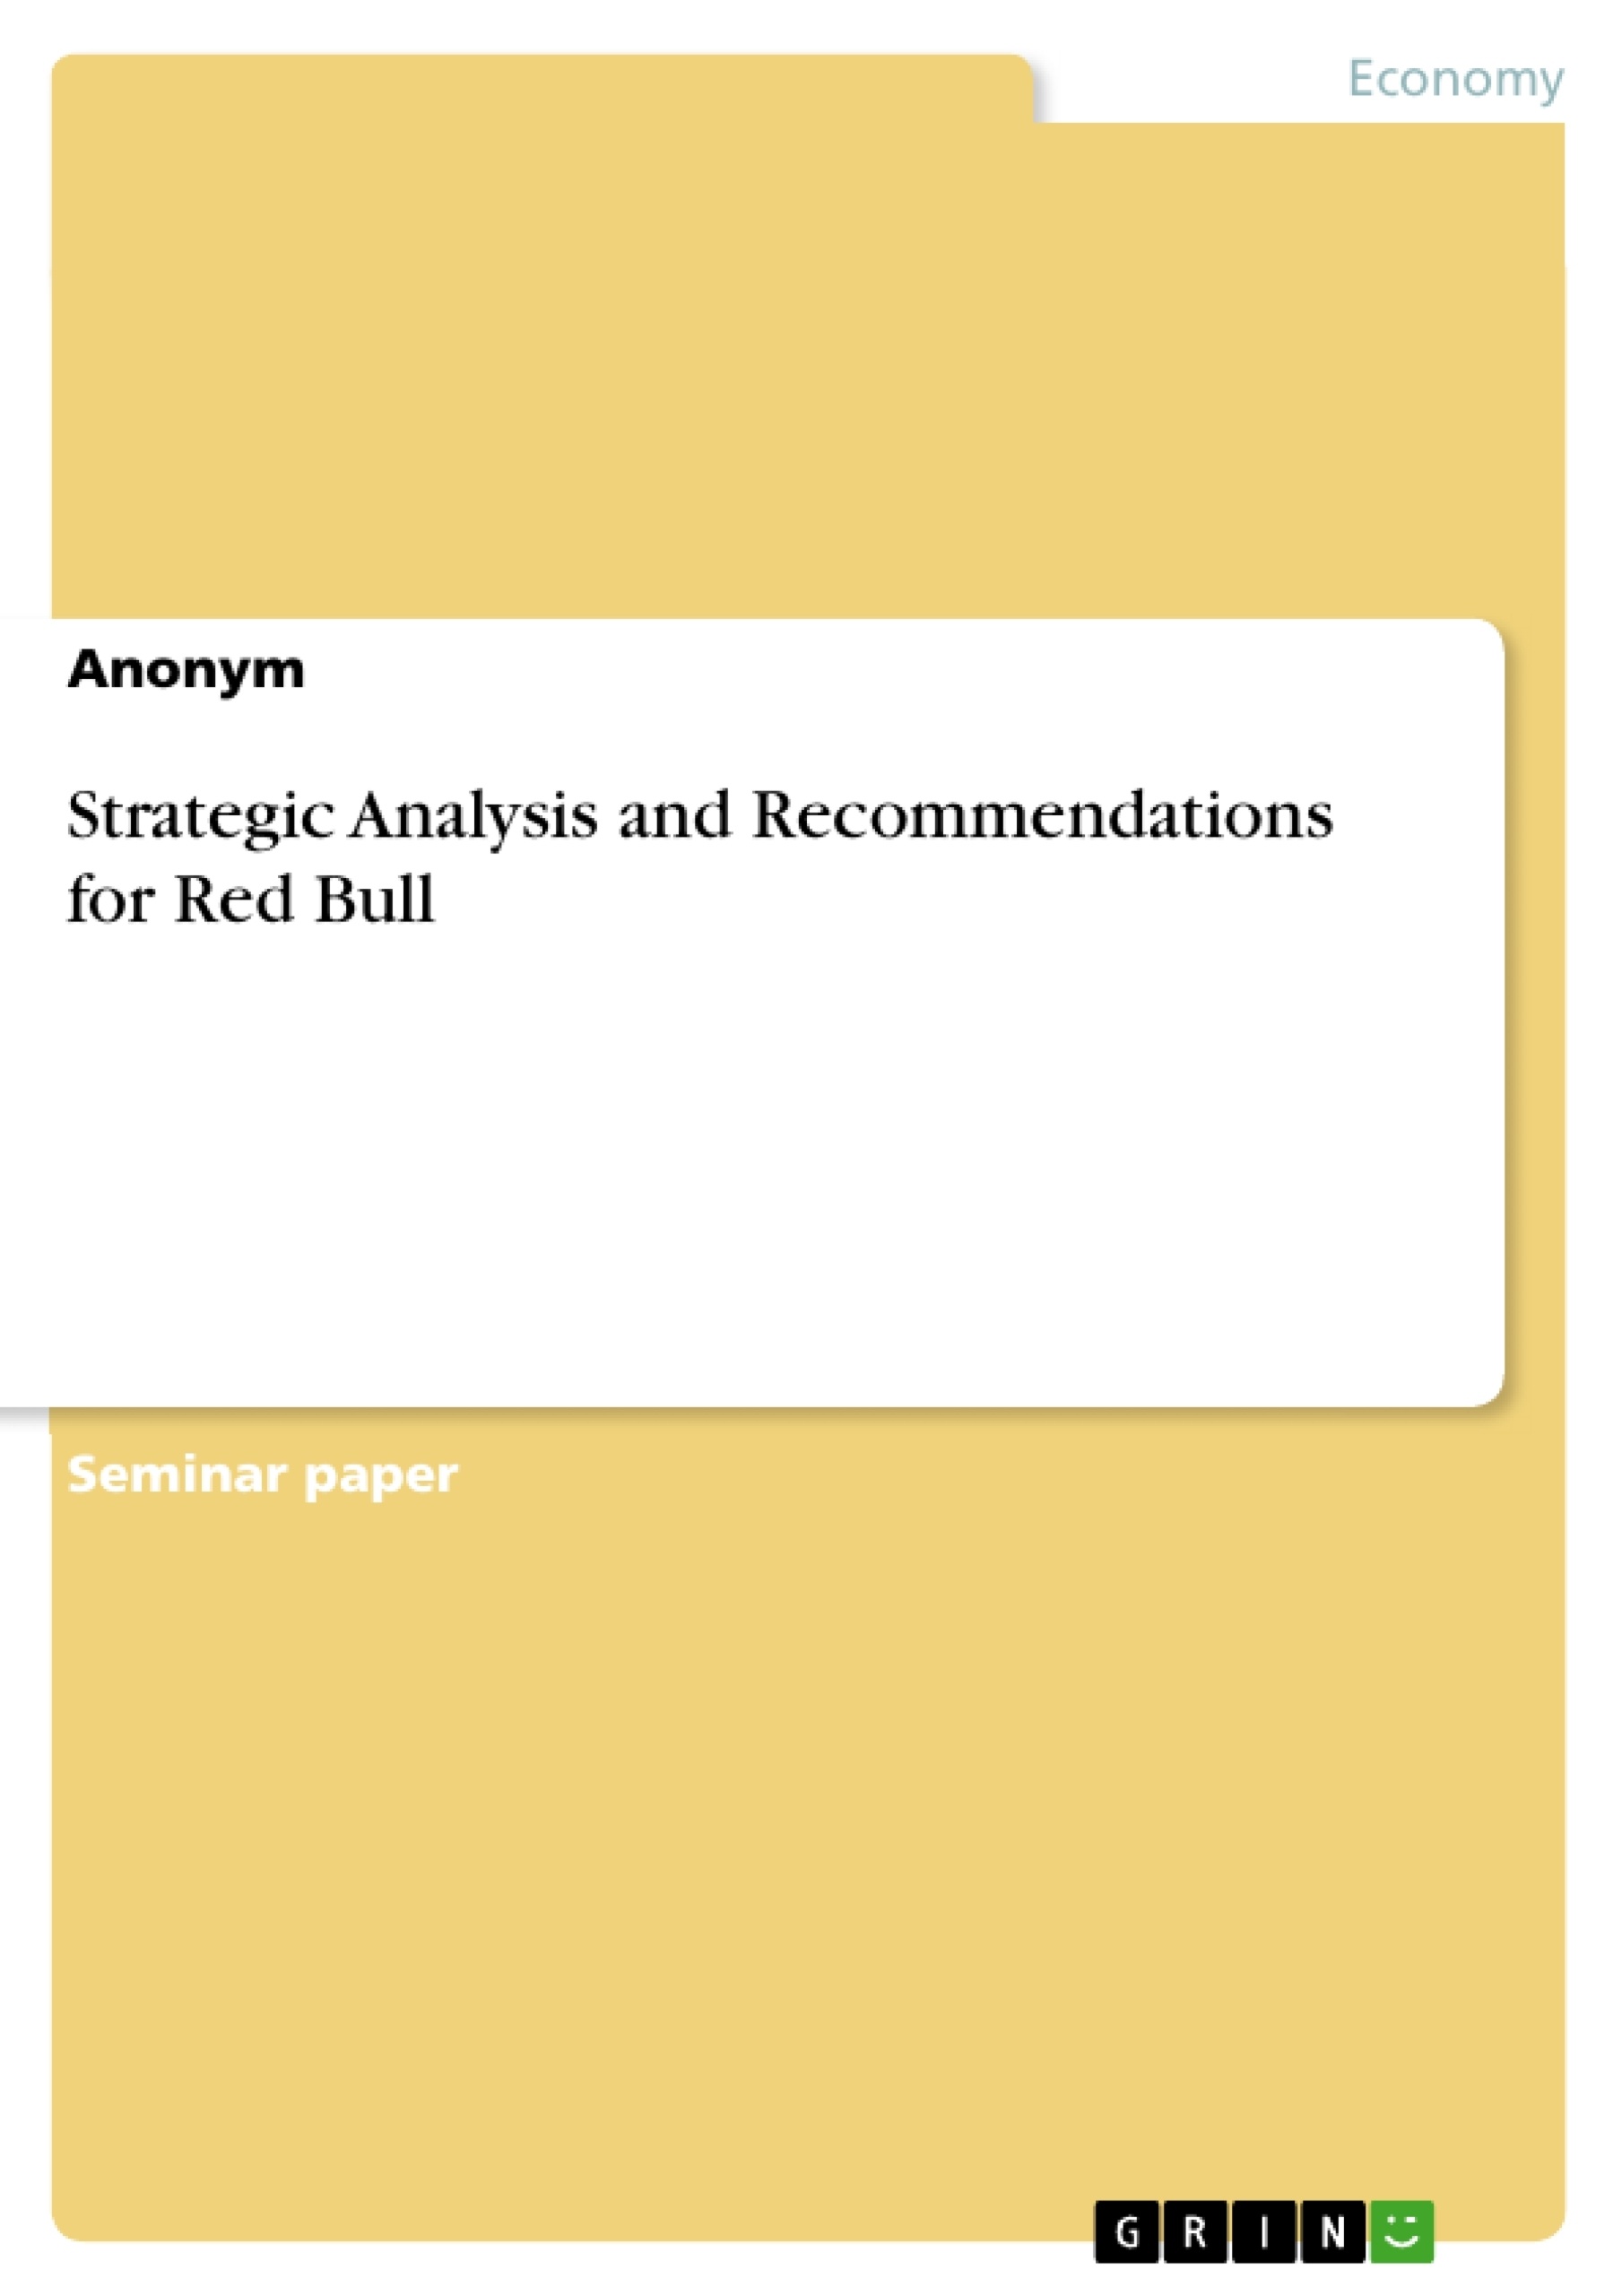 Title: Strategic Analysis and Recommendations for Red Bull